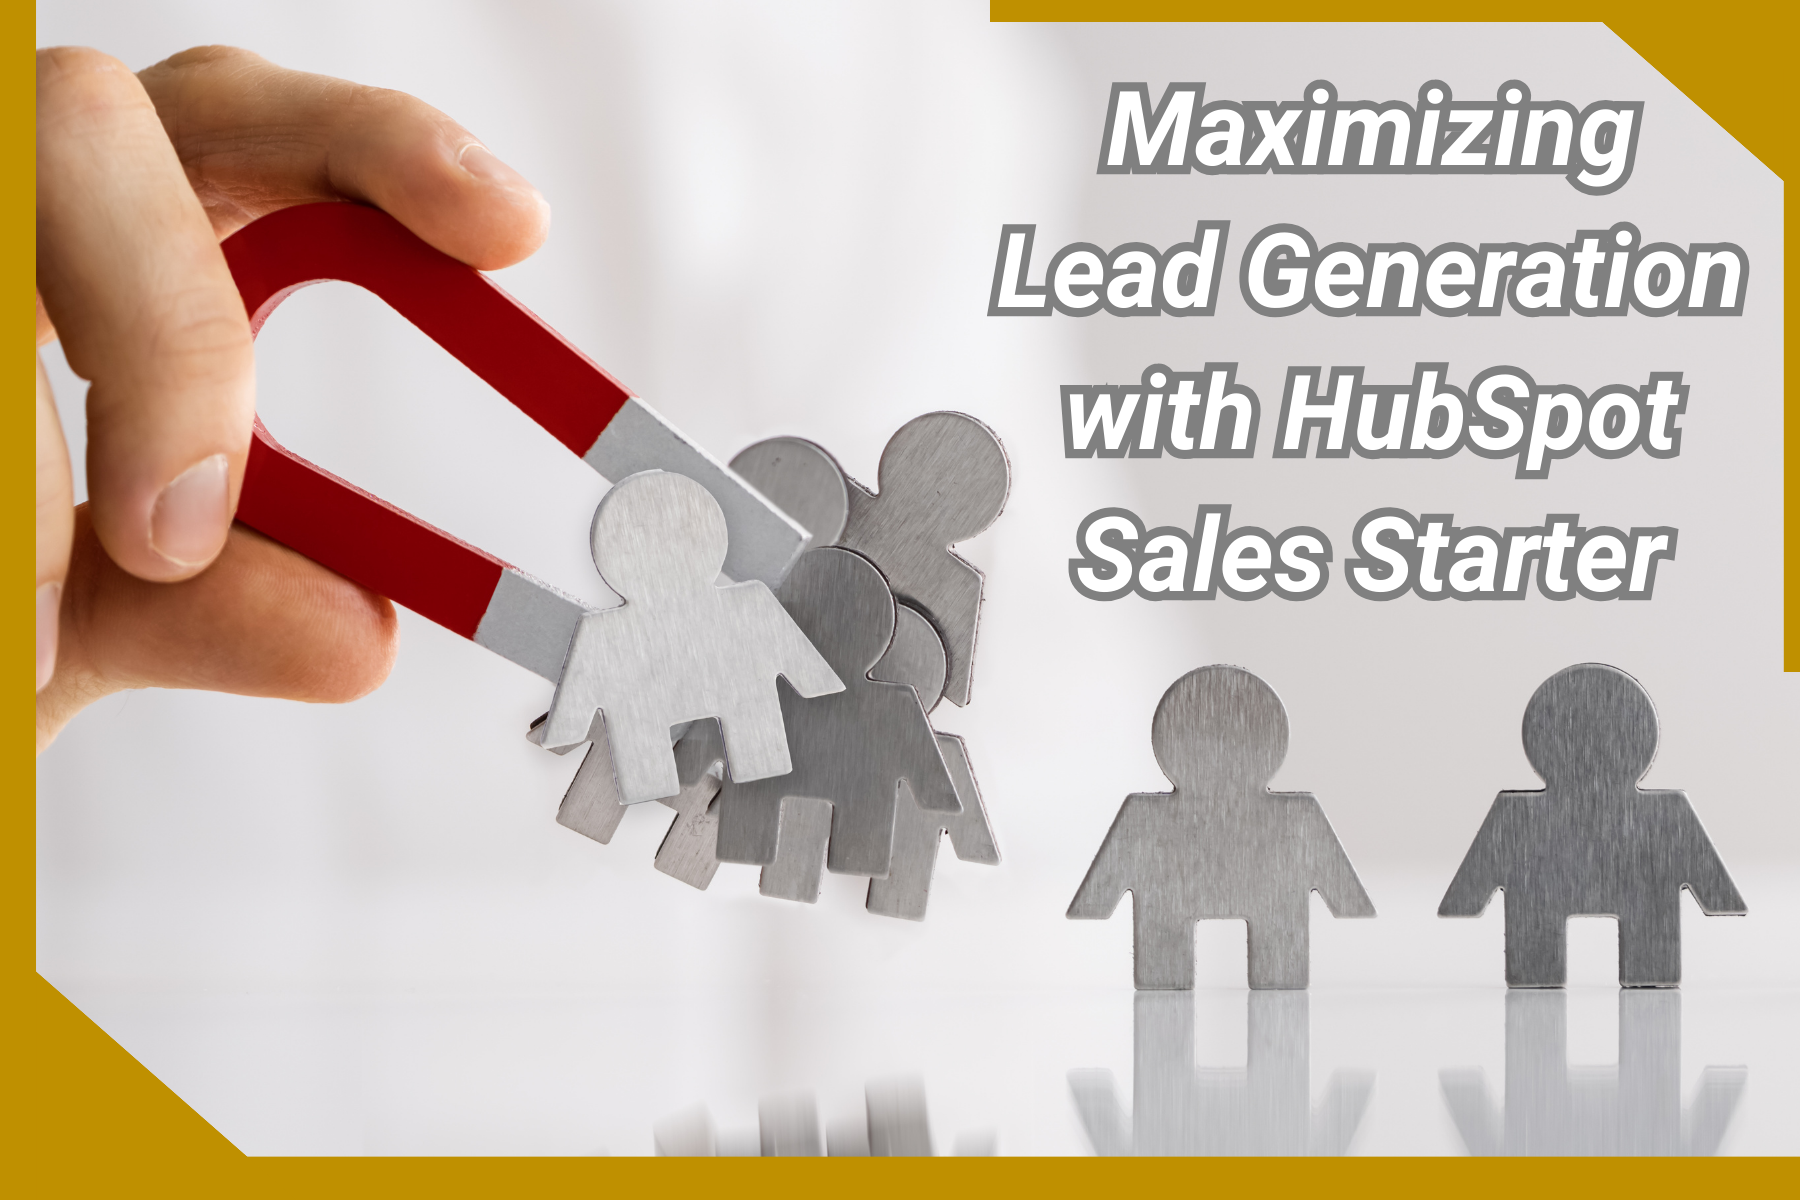 Maximizing Lead Generation with HubSpot Sales Starter